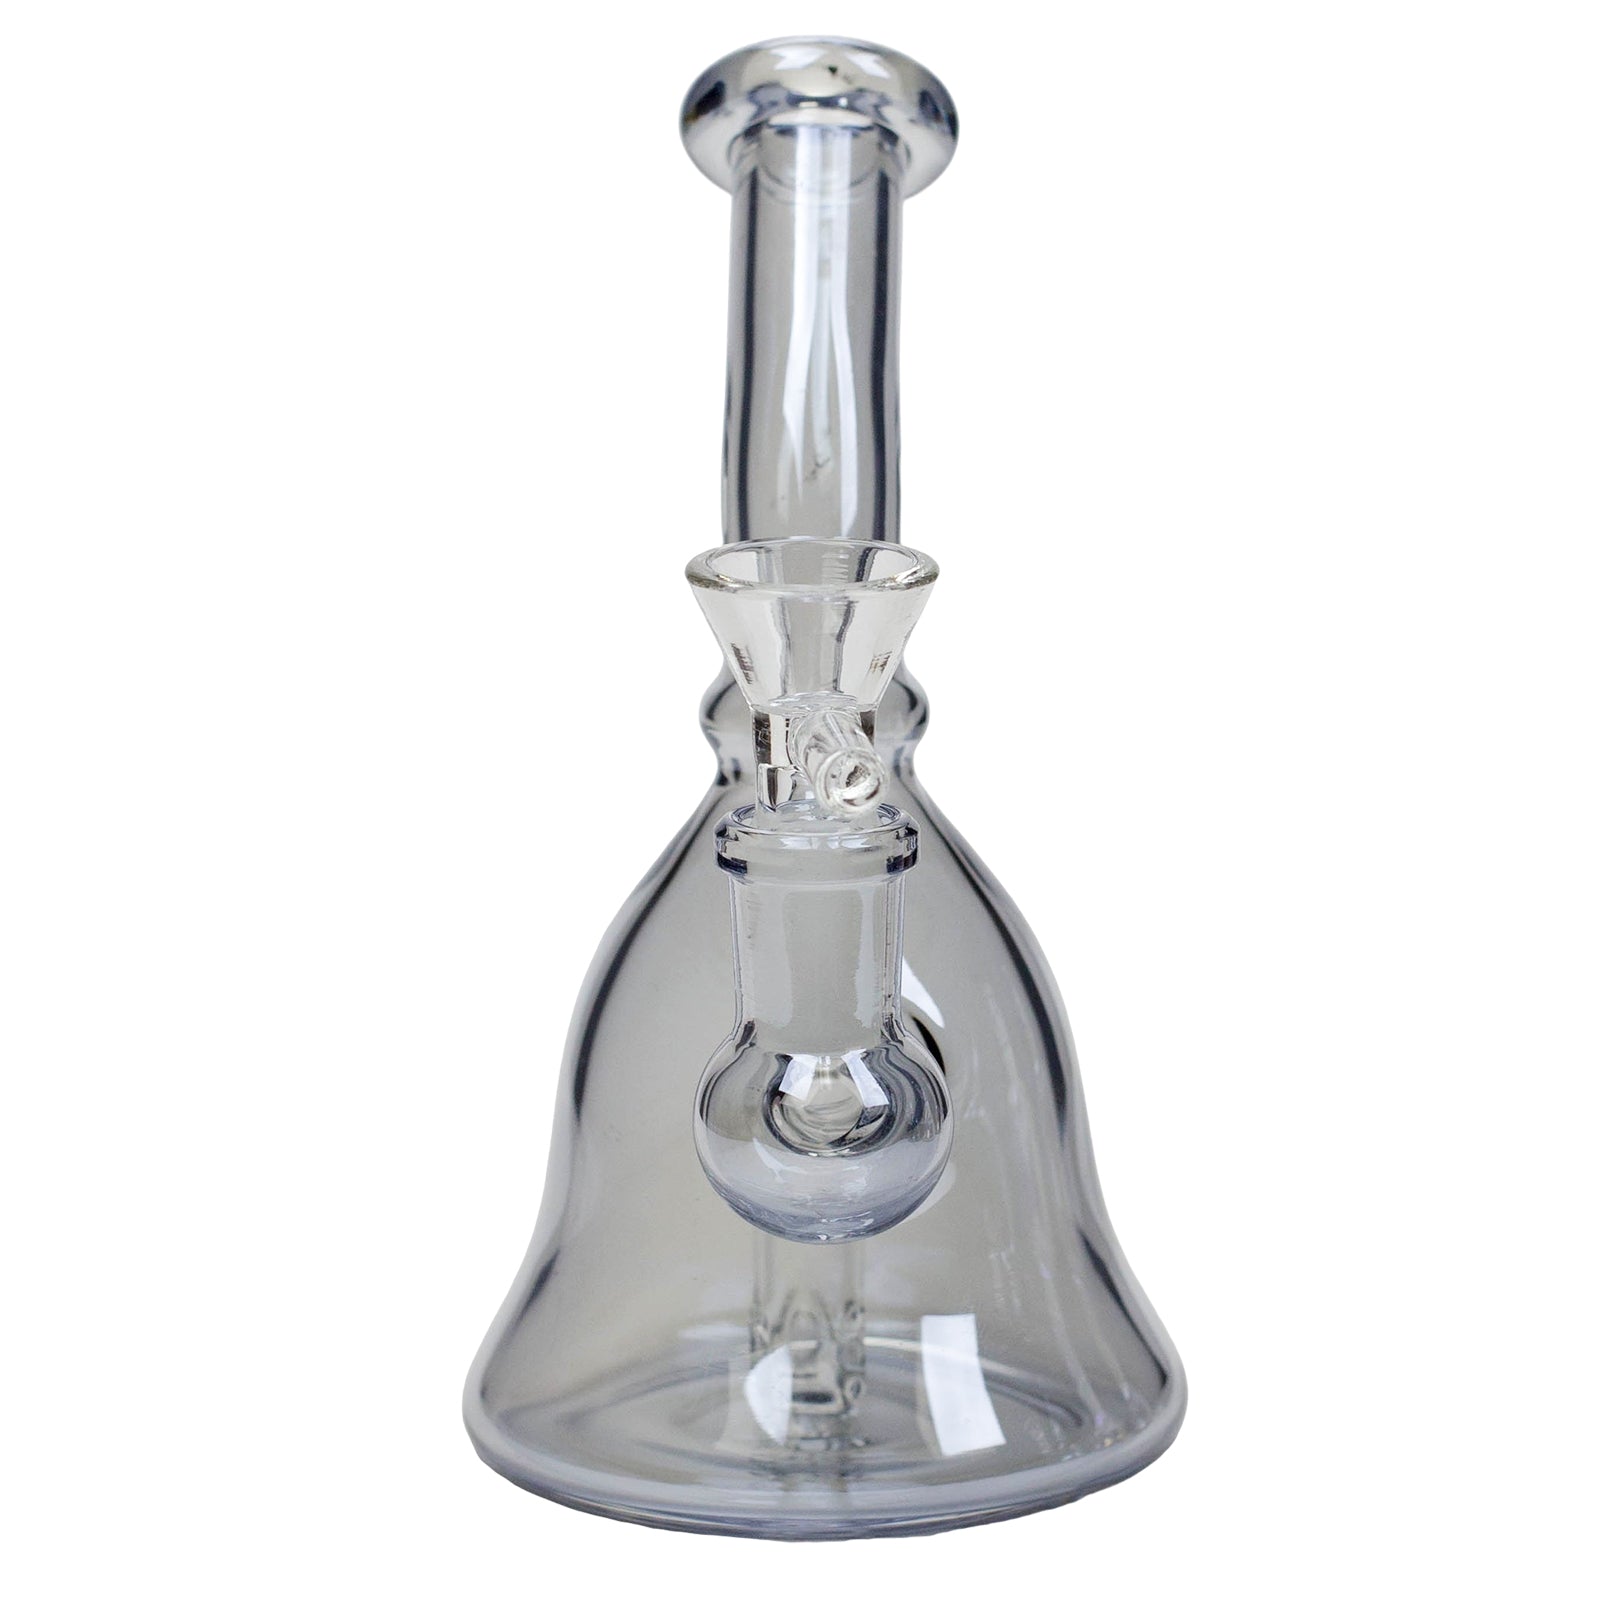 2-in-1 Fixed 3-Hole Diffuser Bell Bubbler